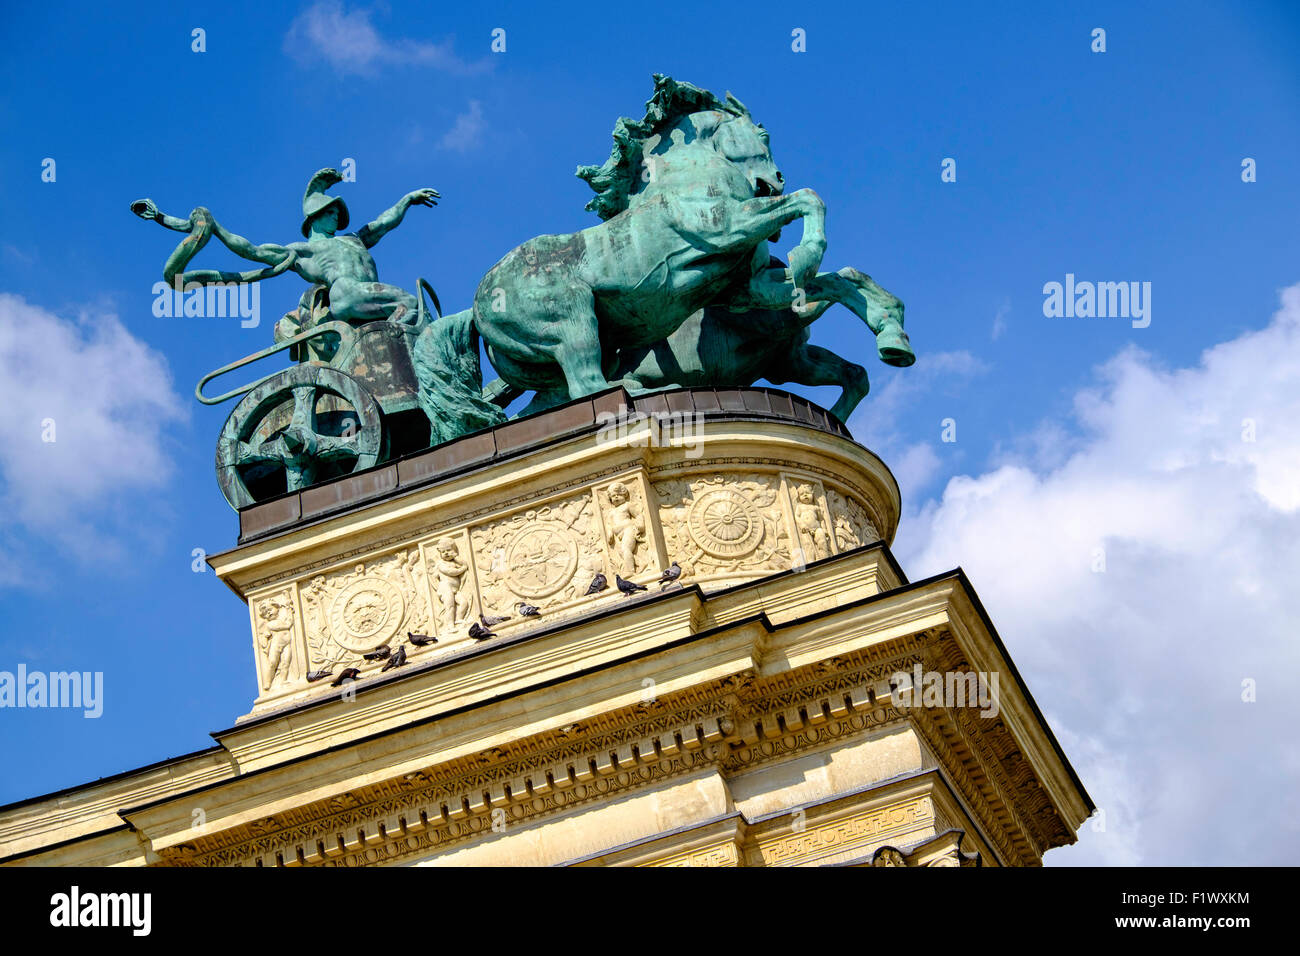 Part of Monument in Heroes Square, Budapest Hungary. The bronze statue of 'War' with chariot and horses is on top of colonnade. Stock Photo